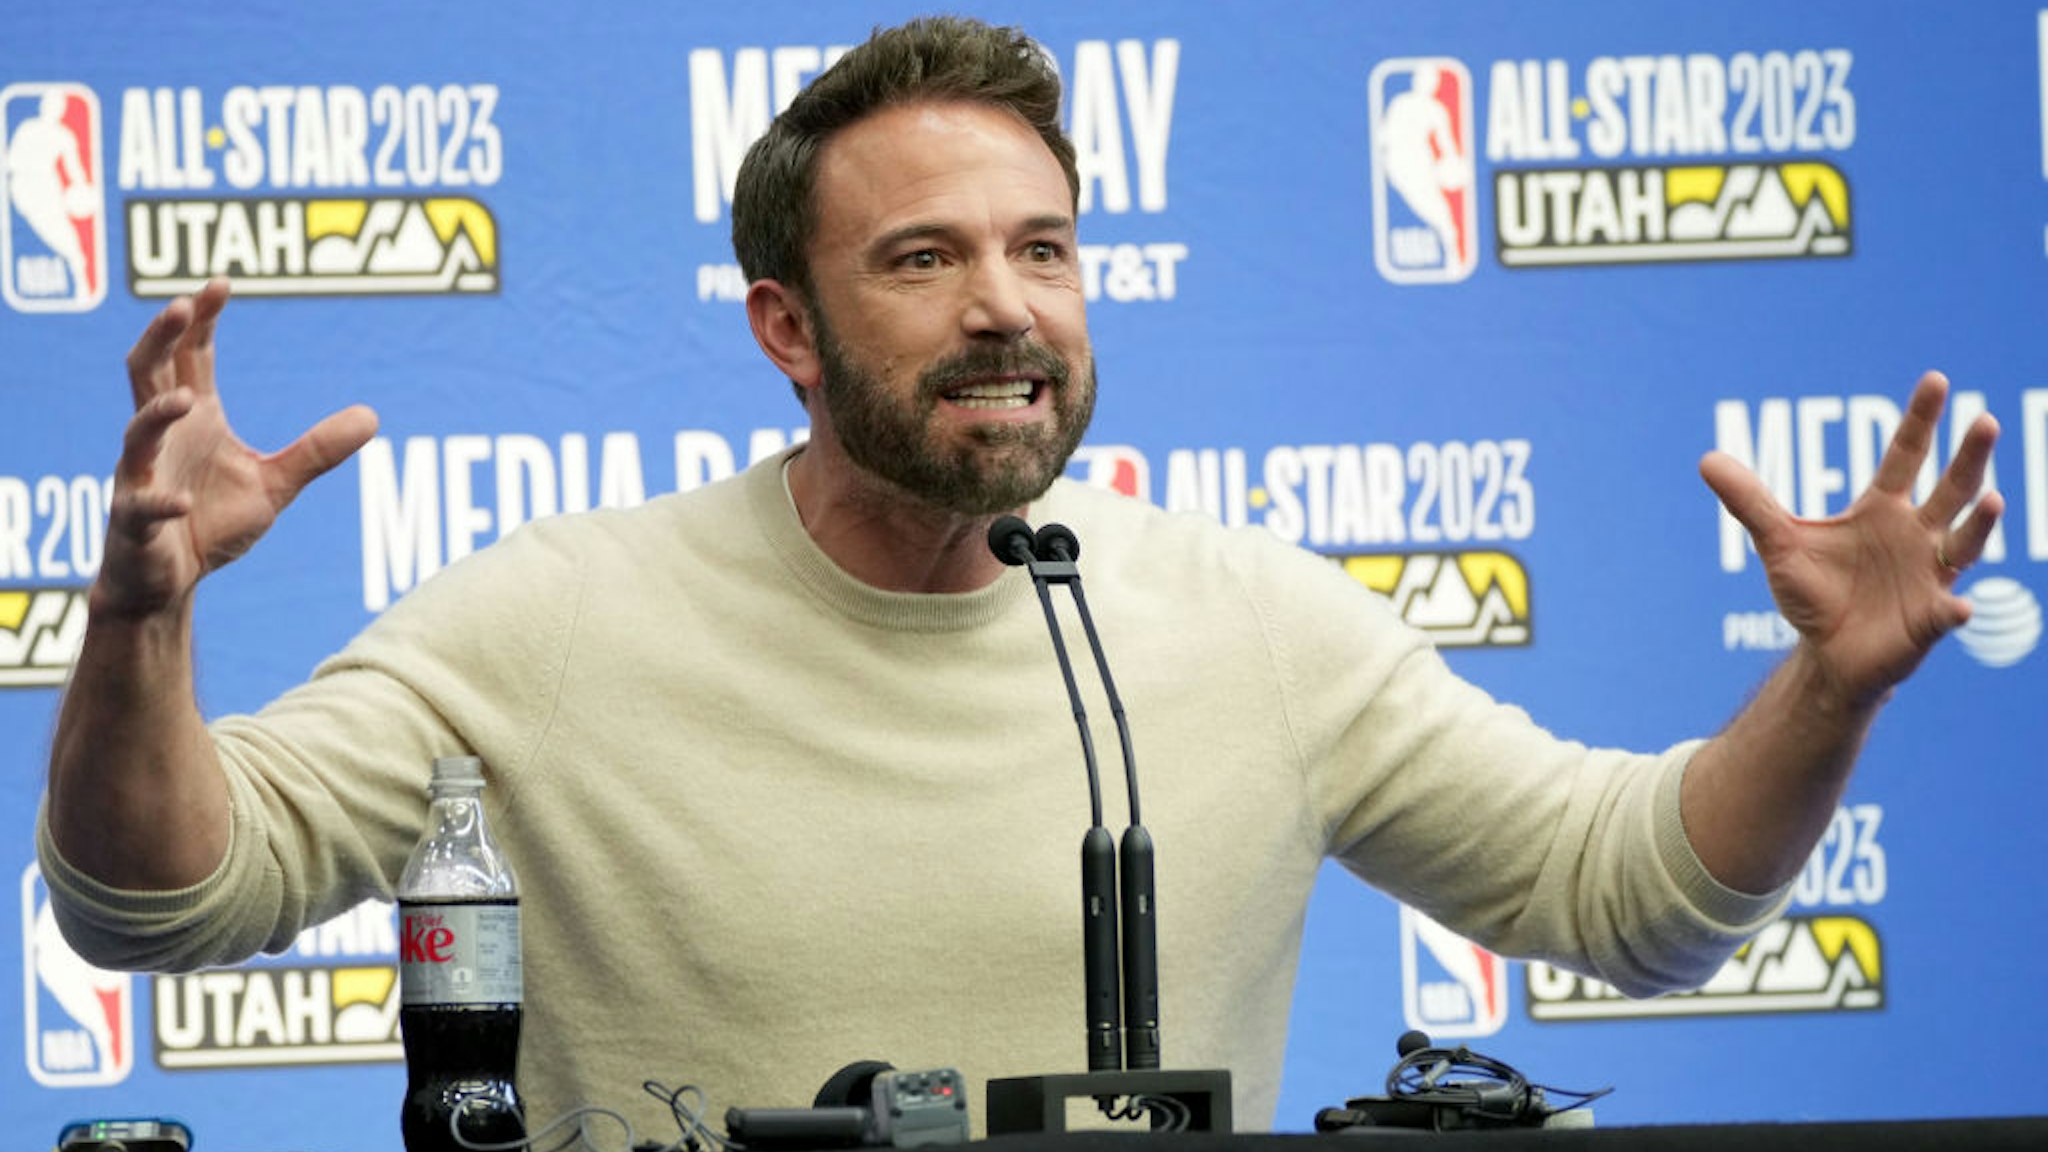 SALT LAKE CITY, UTAH - FEBRUARY 17: Ben Affleck speaks at the Ruffles Celebrity Game during the 2023 NBA All-Star Weekend at Vivint Arena on February 17, 2023 in Salt Lake City, Utah. (Photo by Kevin Mazur/Getty Images)